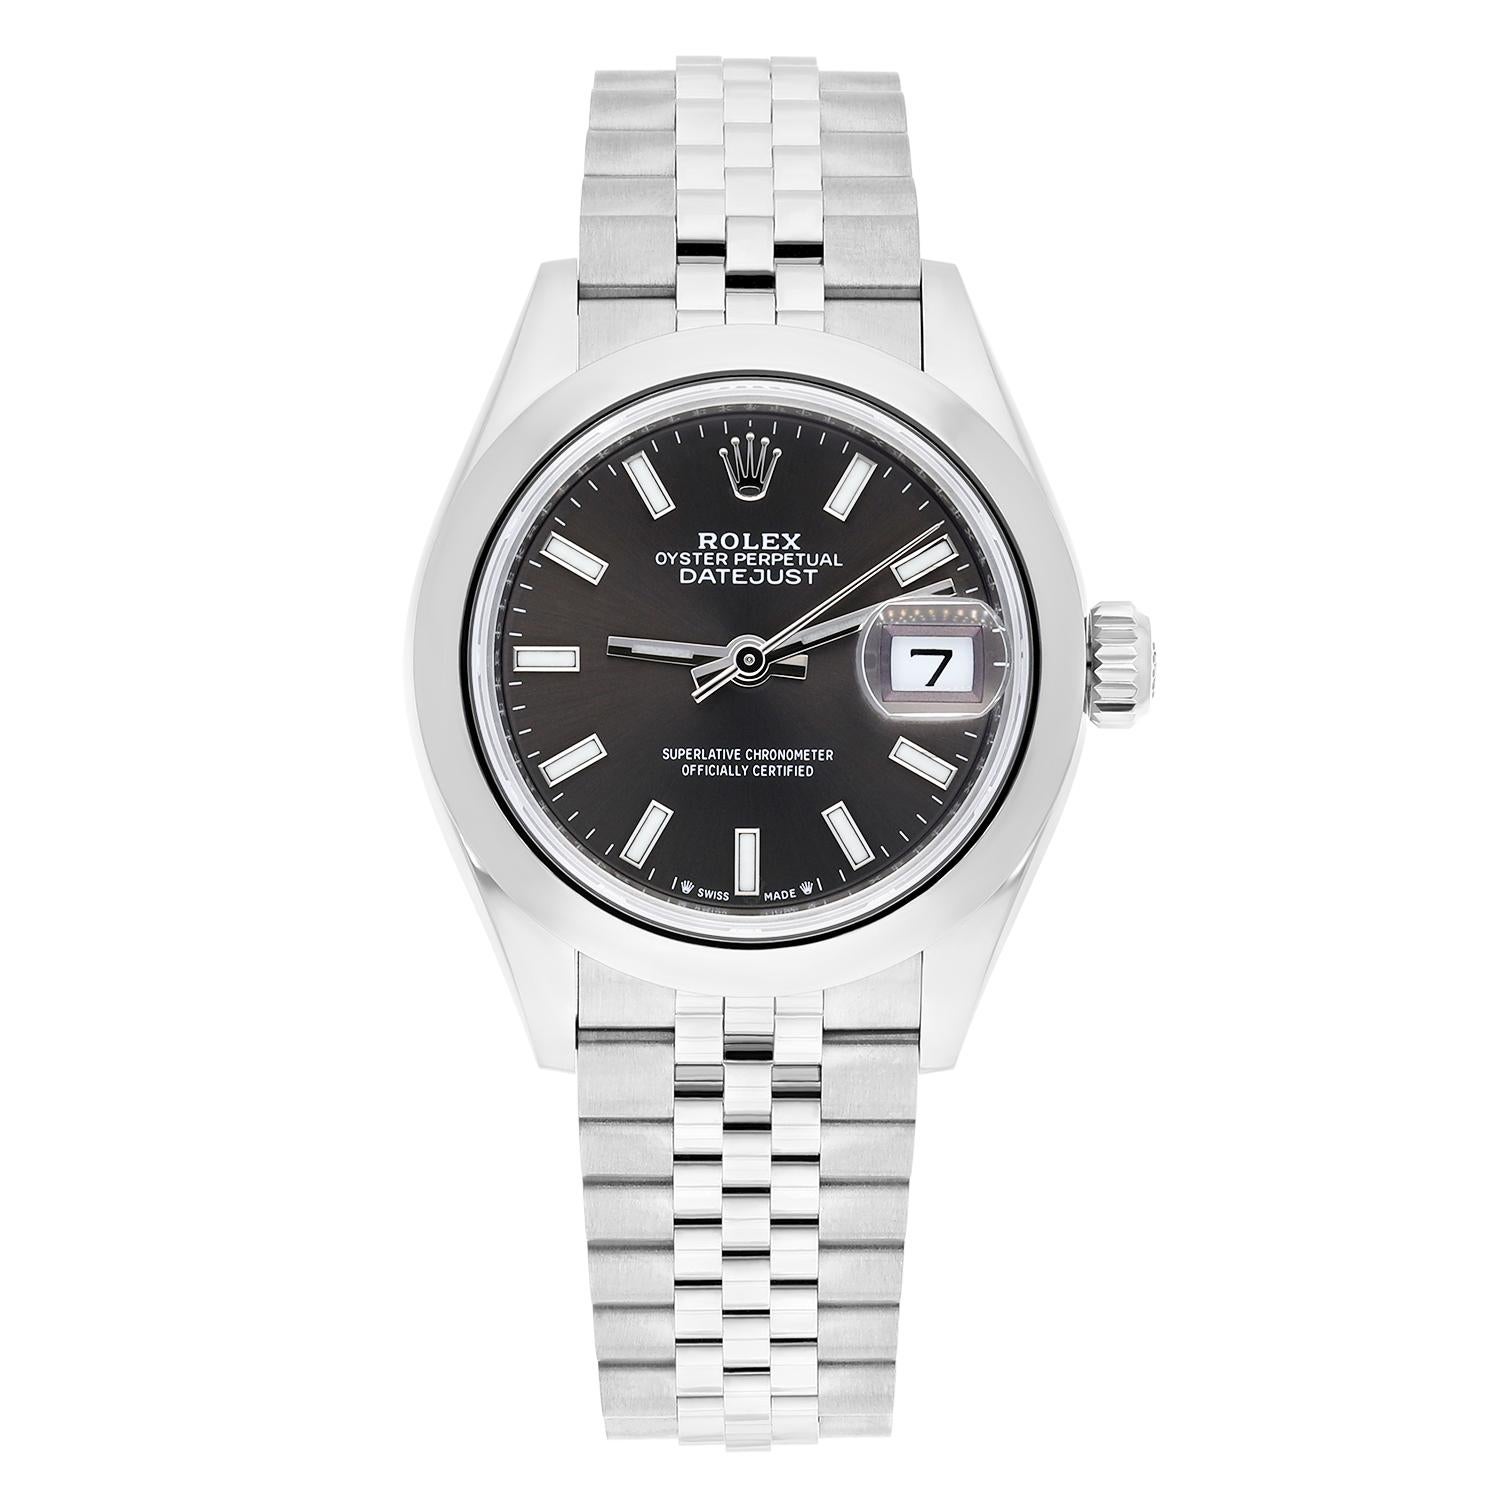 This stunning Rolex Datejust 28 wristwatch is a true masterpiece of Swiss craftsmanship and luxury design. With a sleek, stainless steel case and jubilee bracelet, this timepiece boasts a timeless and versatile style that can be dressed up or down